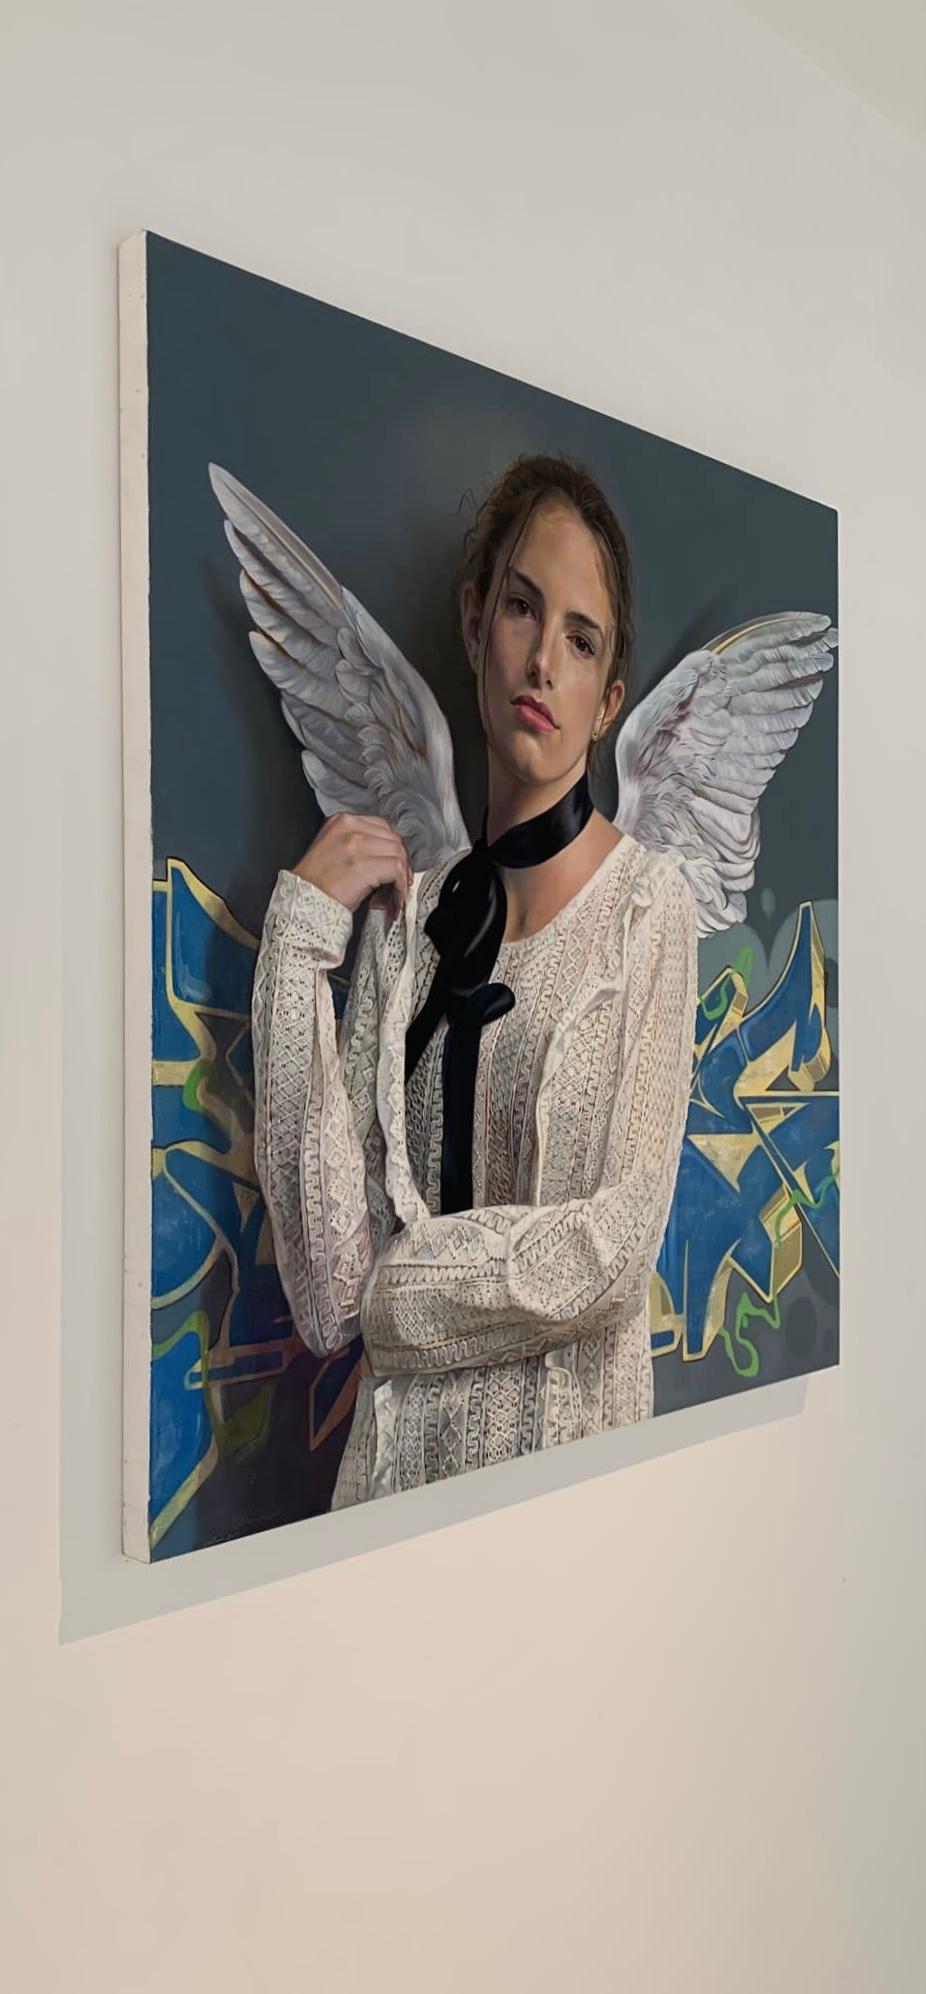 Fly away - Photorealistic portrait painting by Mauro Maugliani For Sale 1